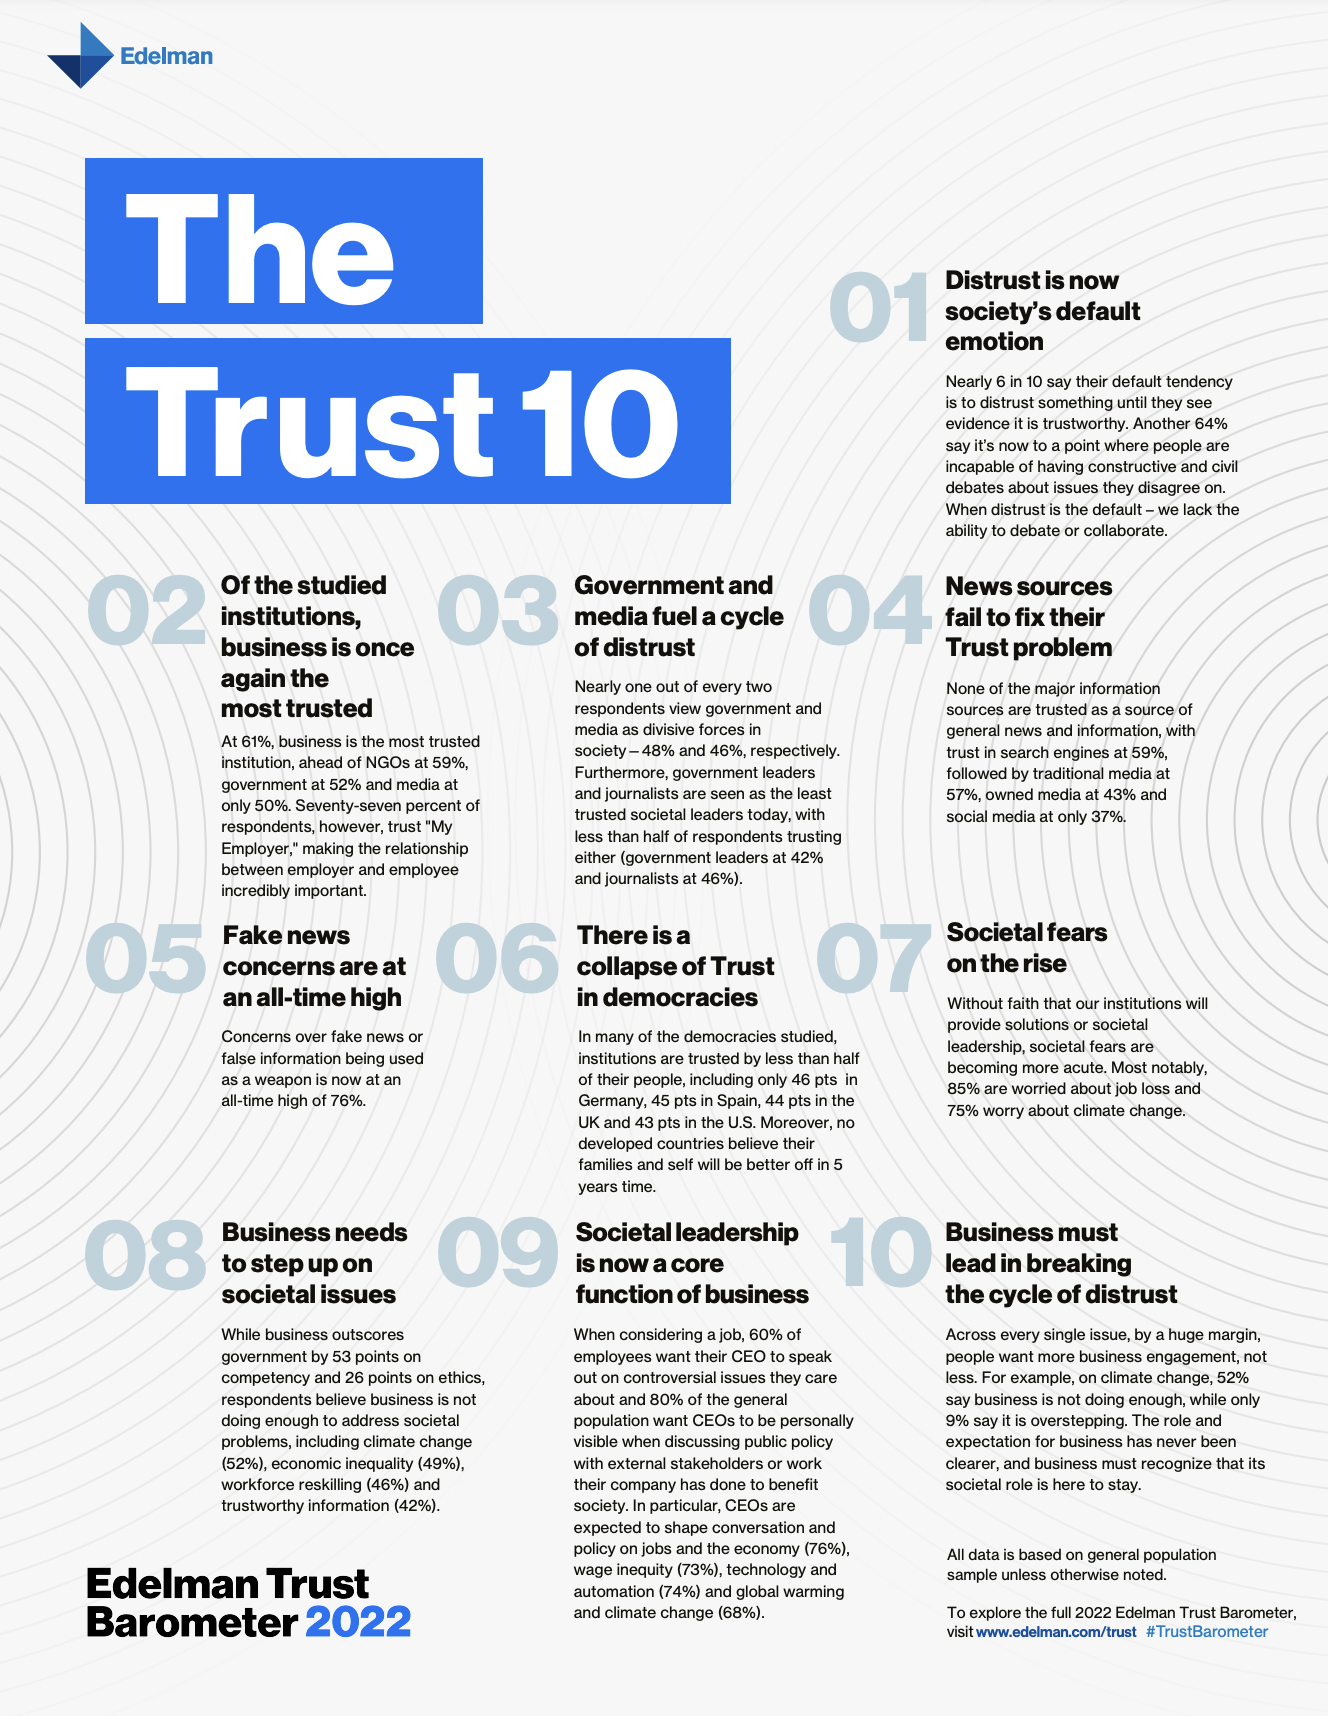 The Trust 10 from the Edelman Trust Barometer 2022